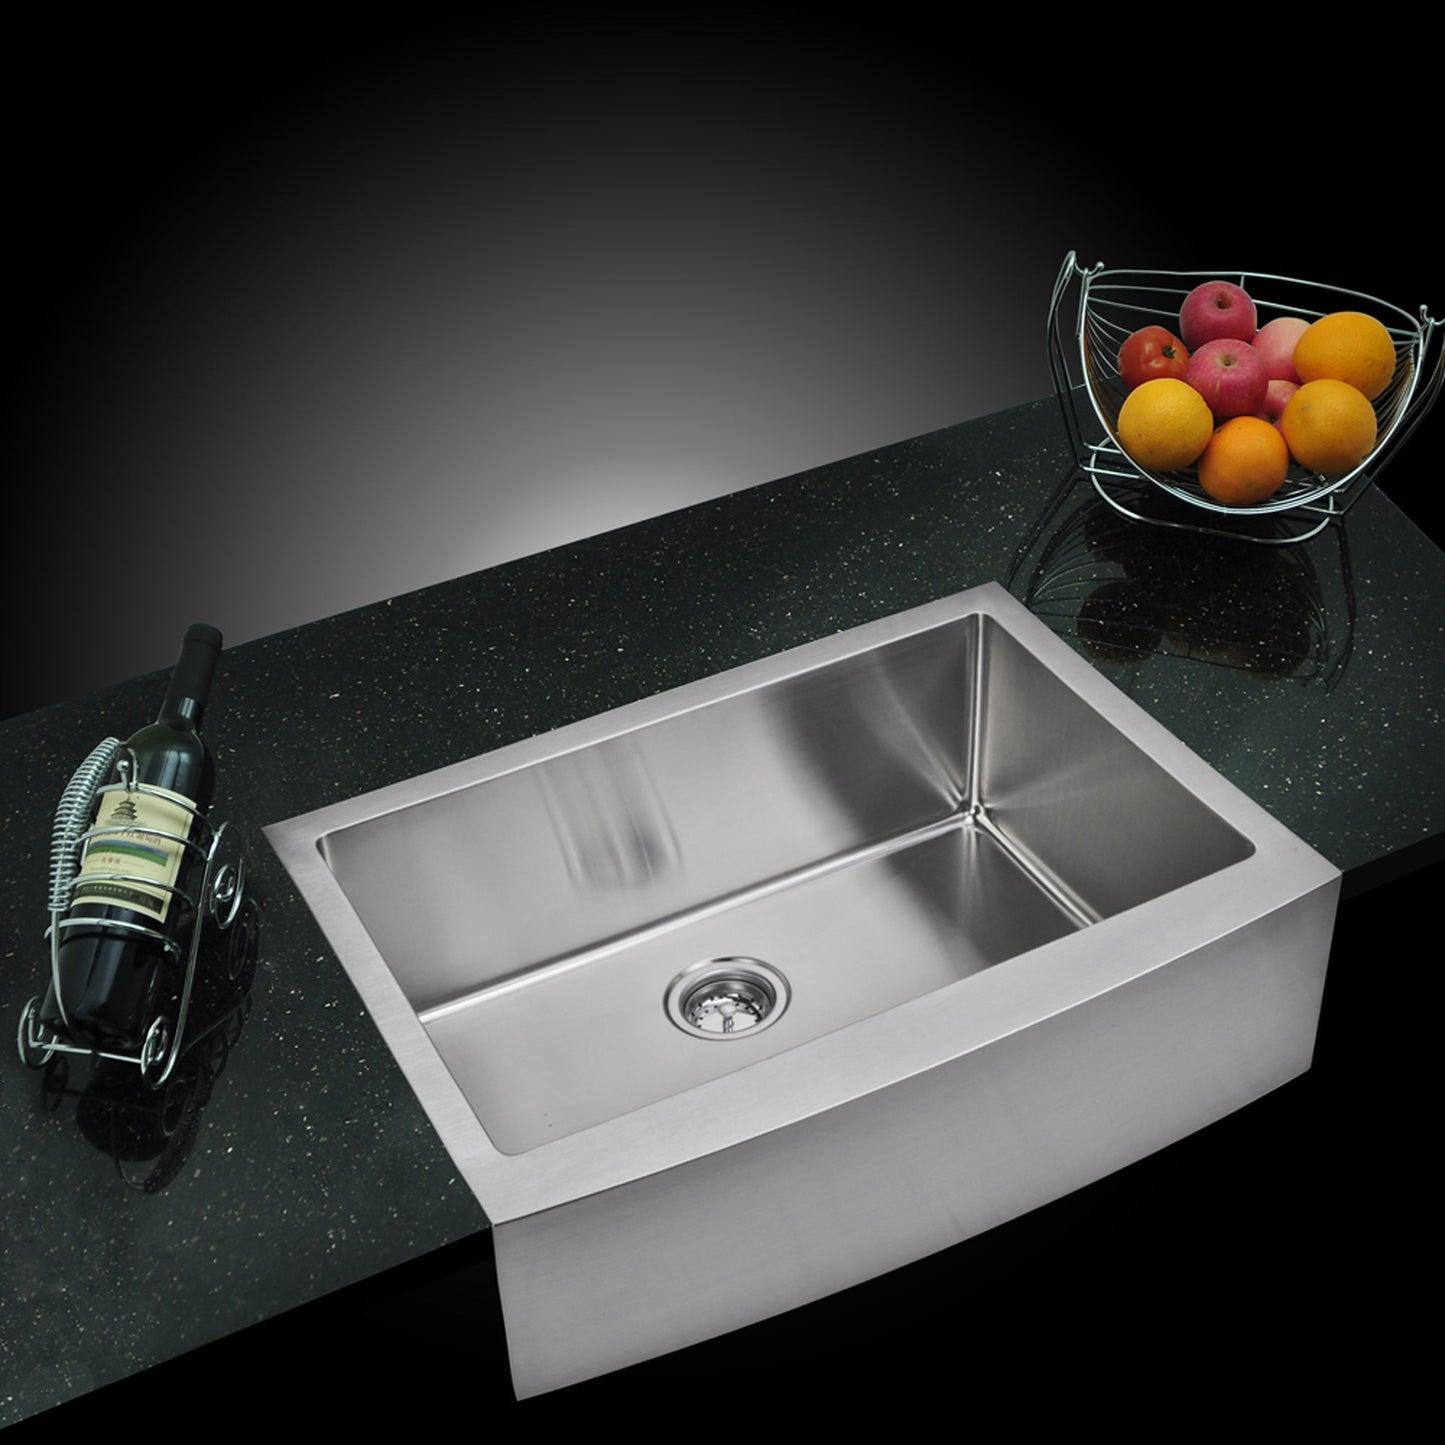 30 Inch X 22 Inch 15mm Corner Radius Single Bowl Stainless Steel Hand Made Apron Front Kitchen Sink